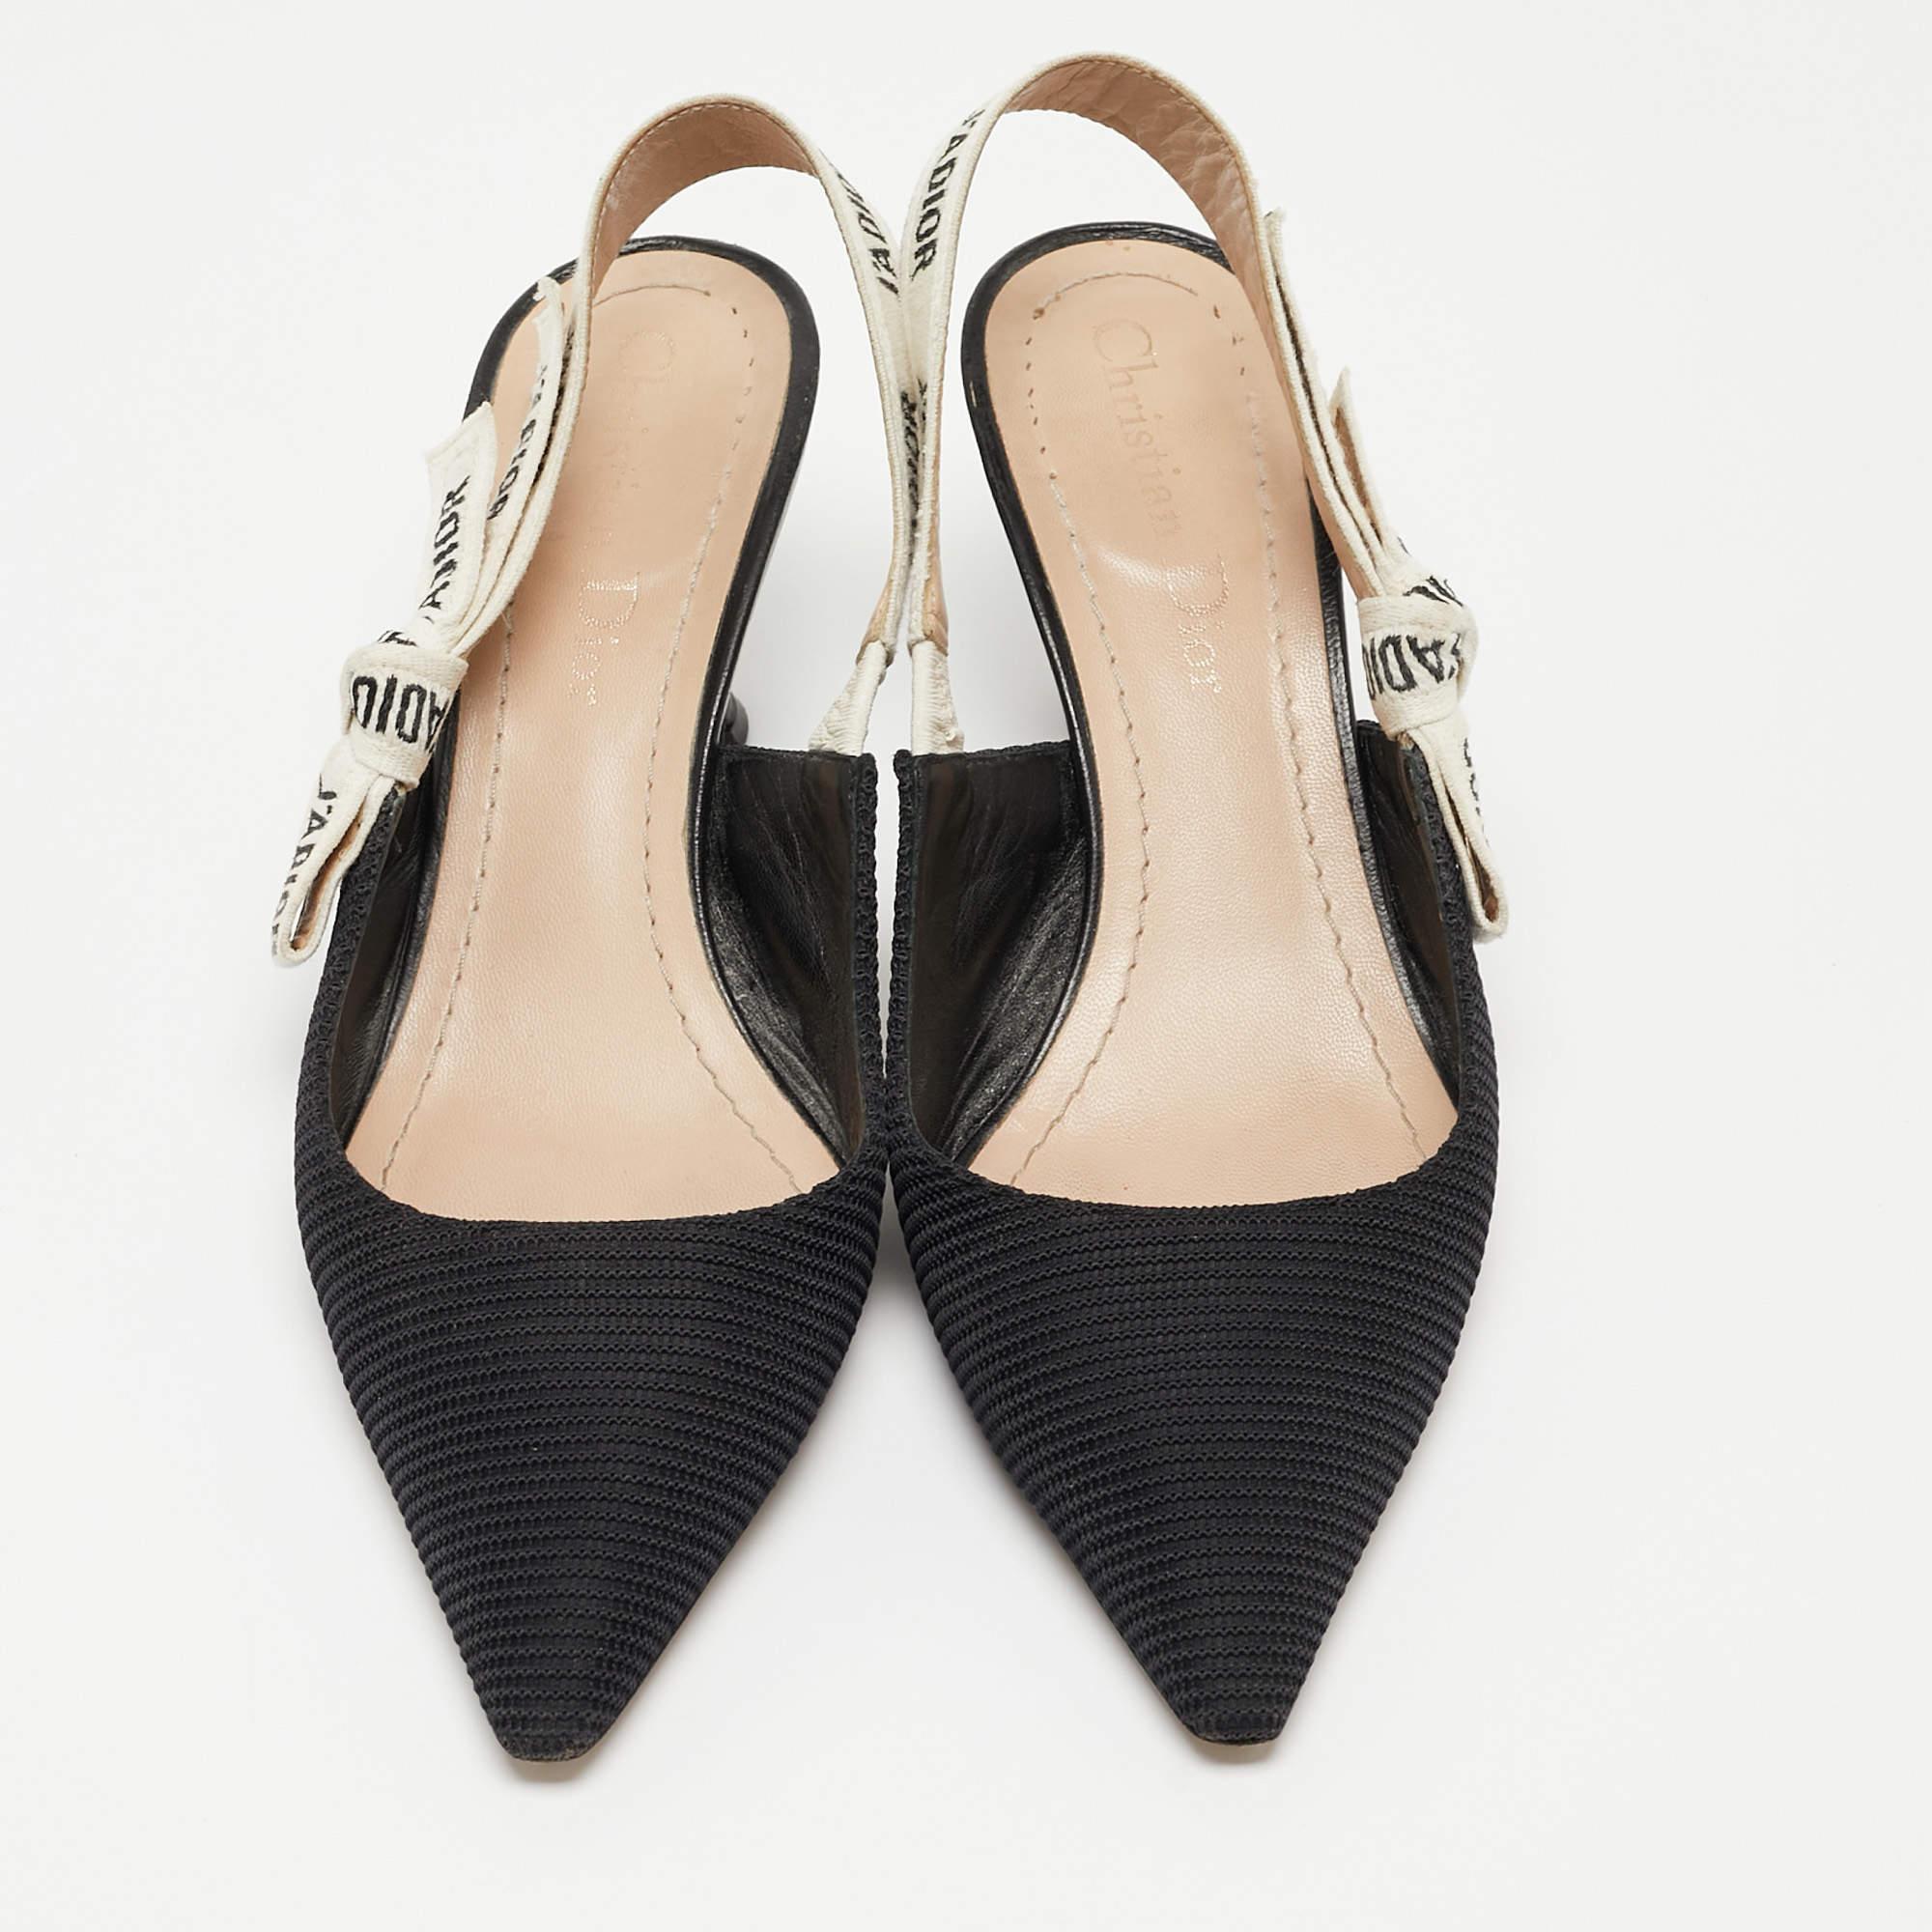 This pair of Dior pumps celebrates femininity like all other designs of the brand. Made from mesh and canvas, the creation is highlighted with a 'J'adior' detailed slingback closure, and the sharp silhouette is balanced on 7cm heels.

